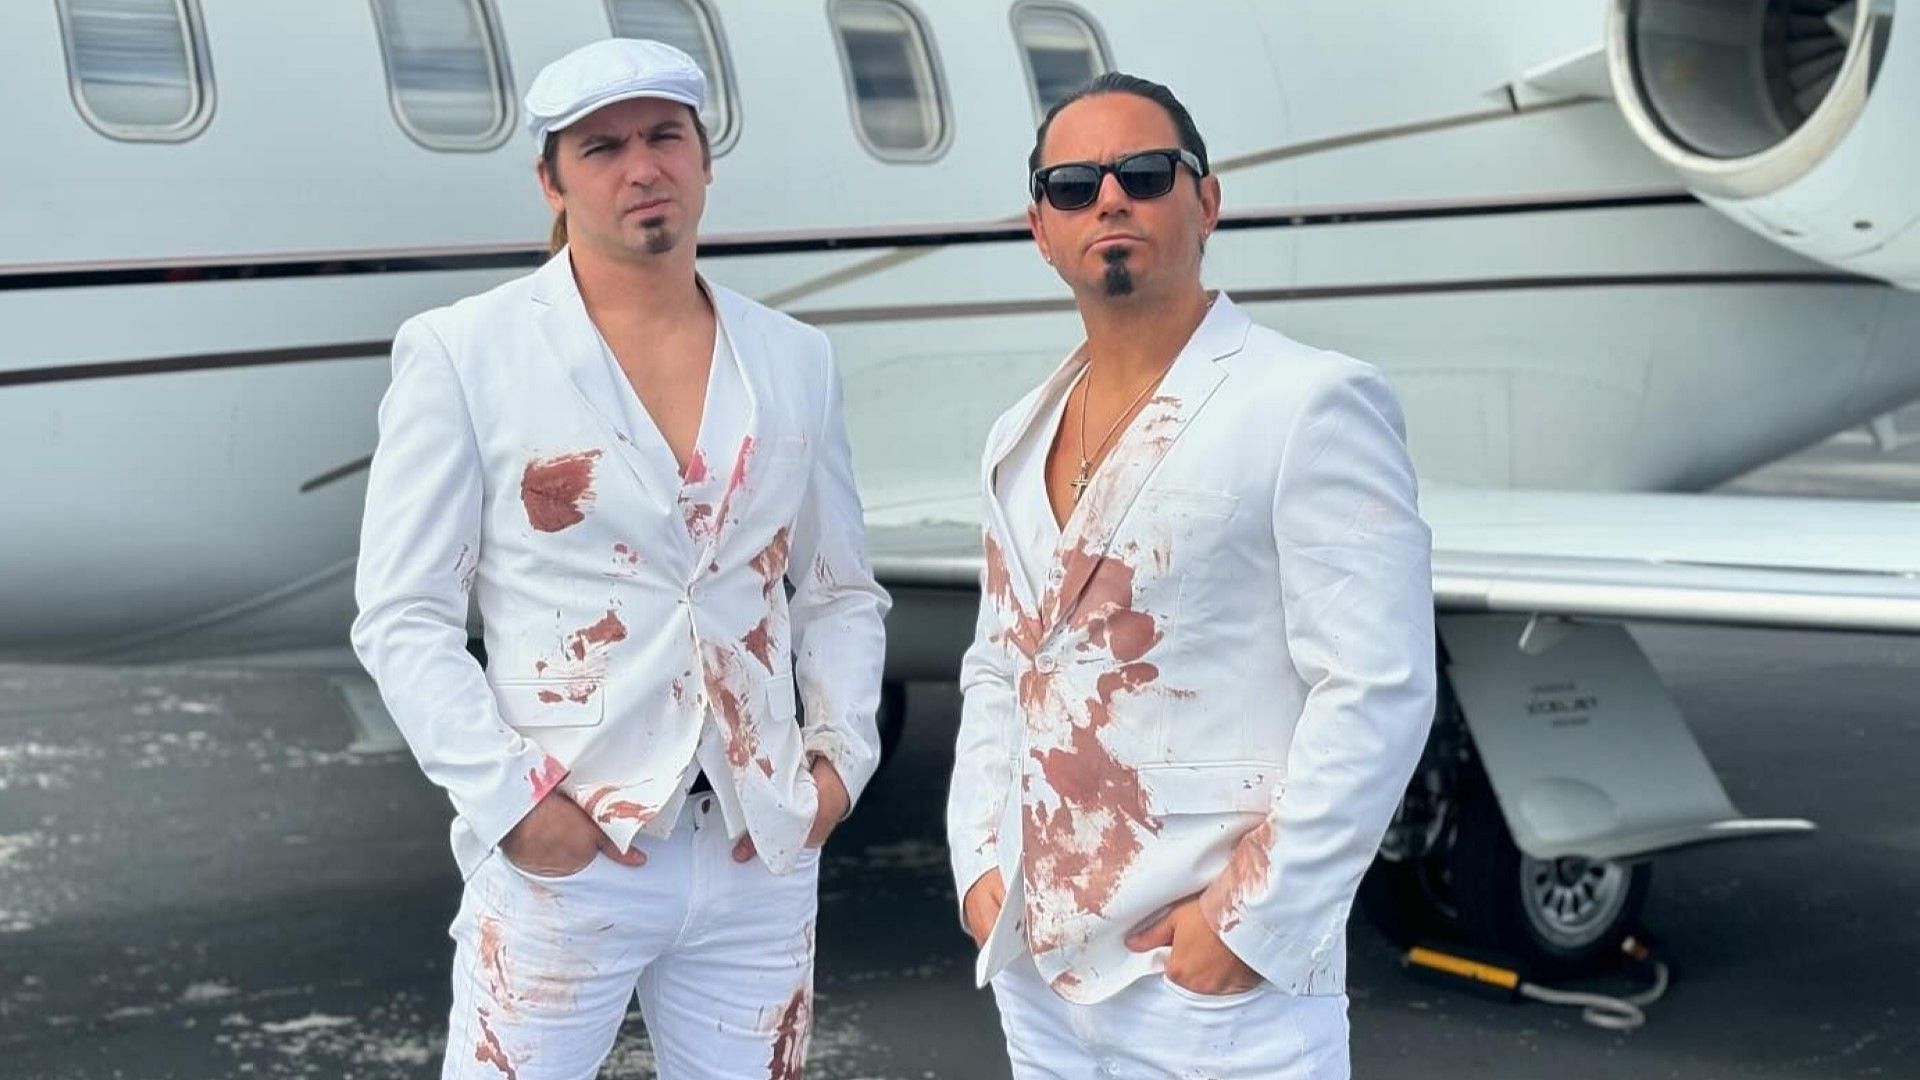 AEW Executive Vice Presidents The Young Bucks outside of the private plane